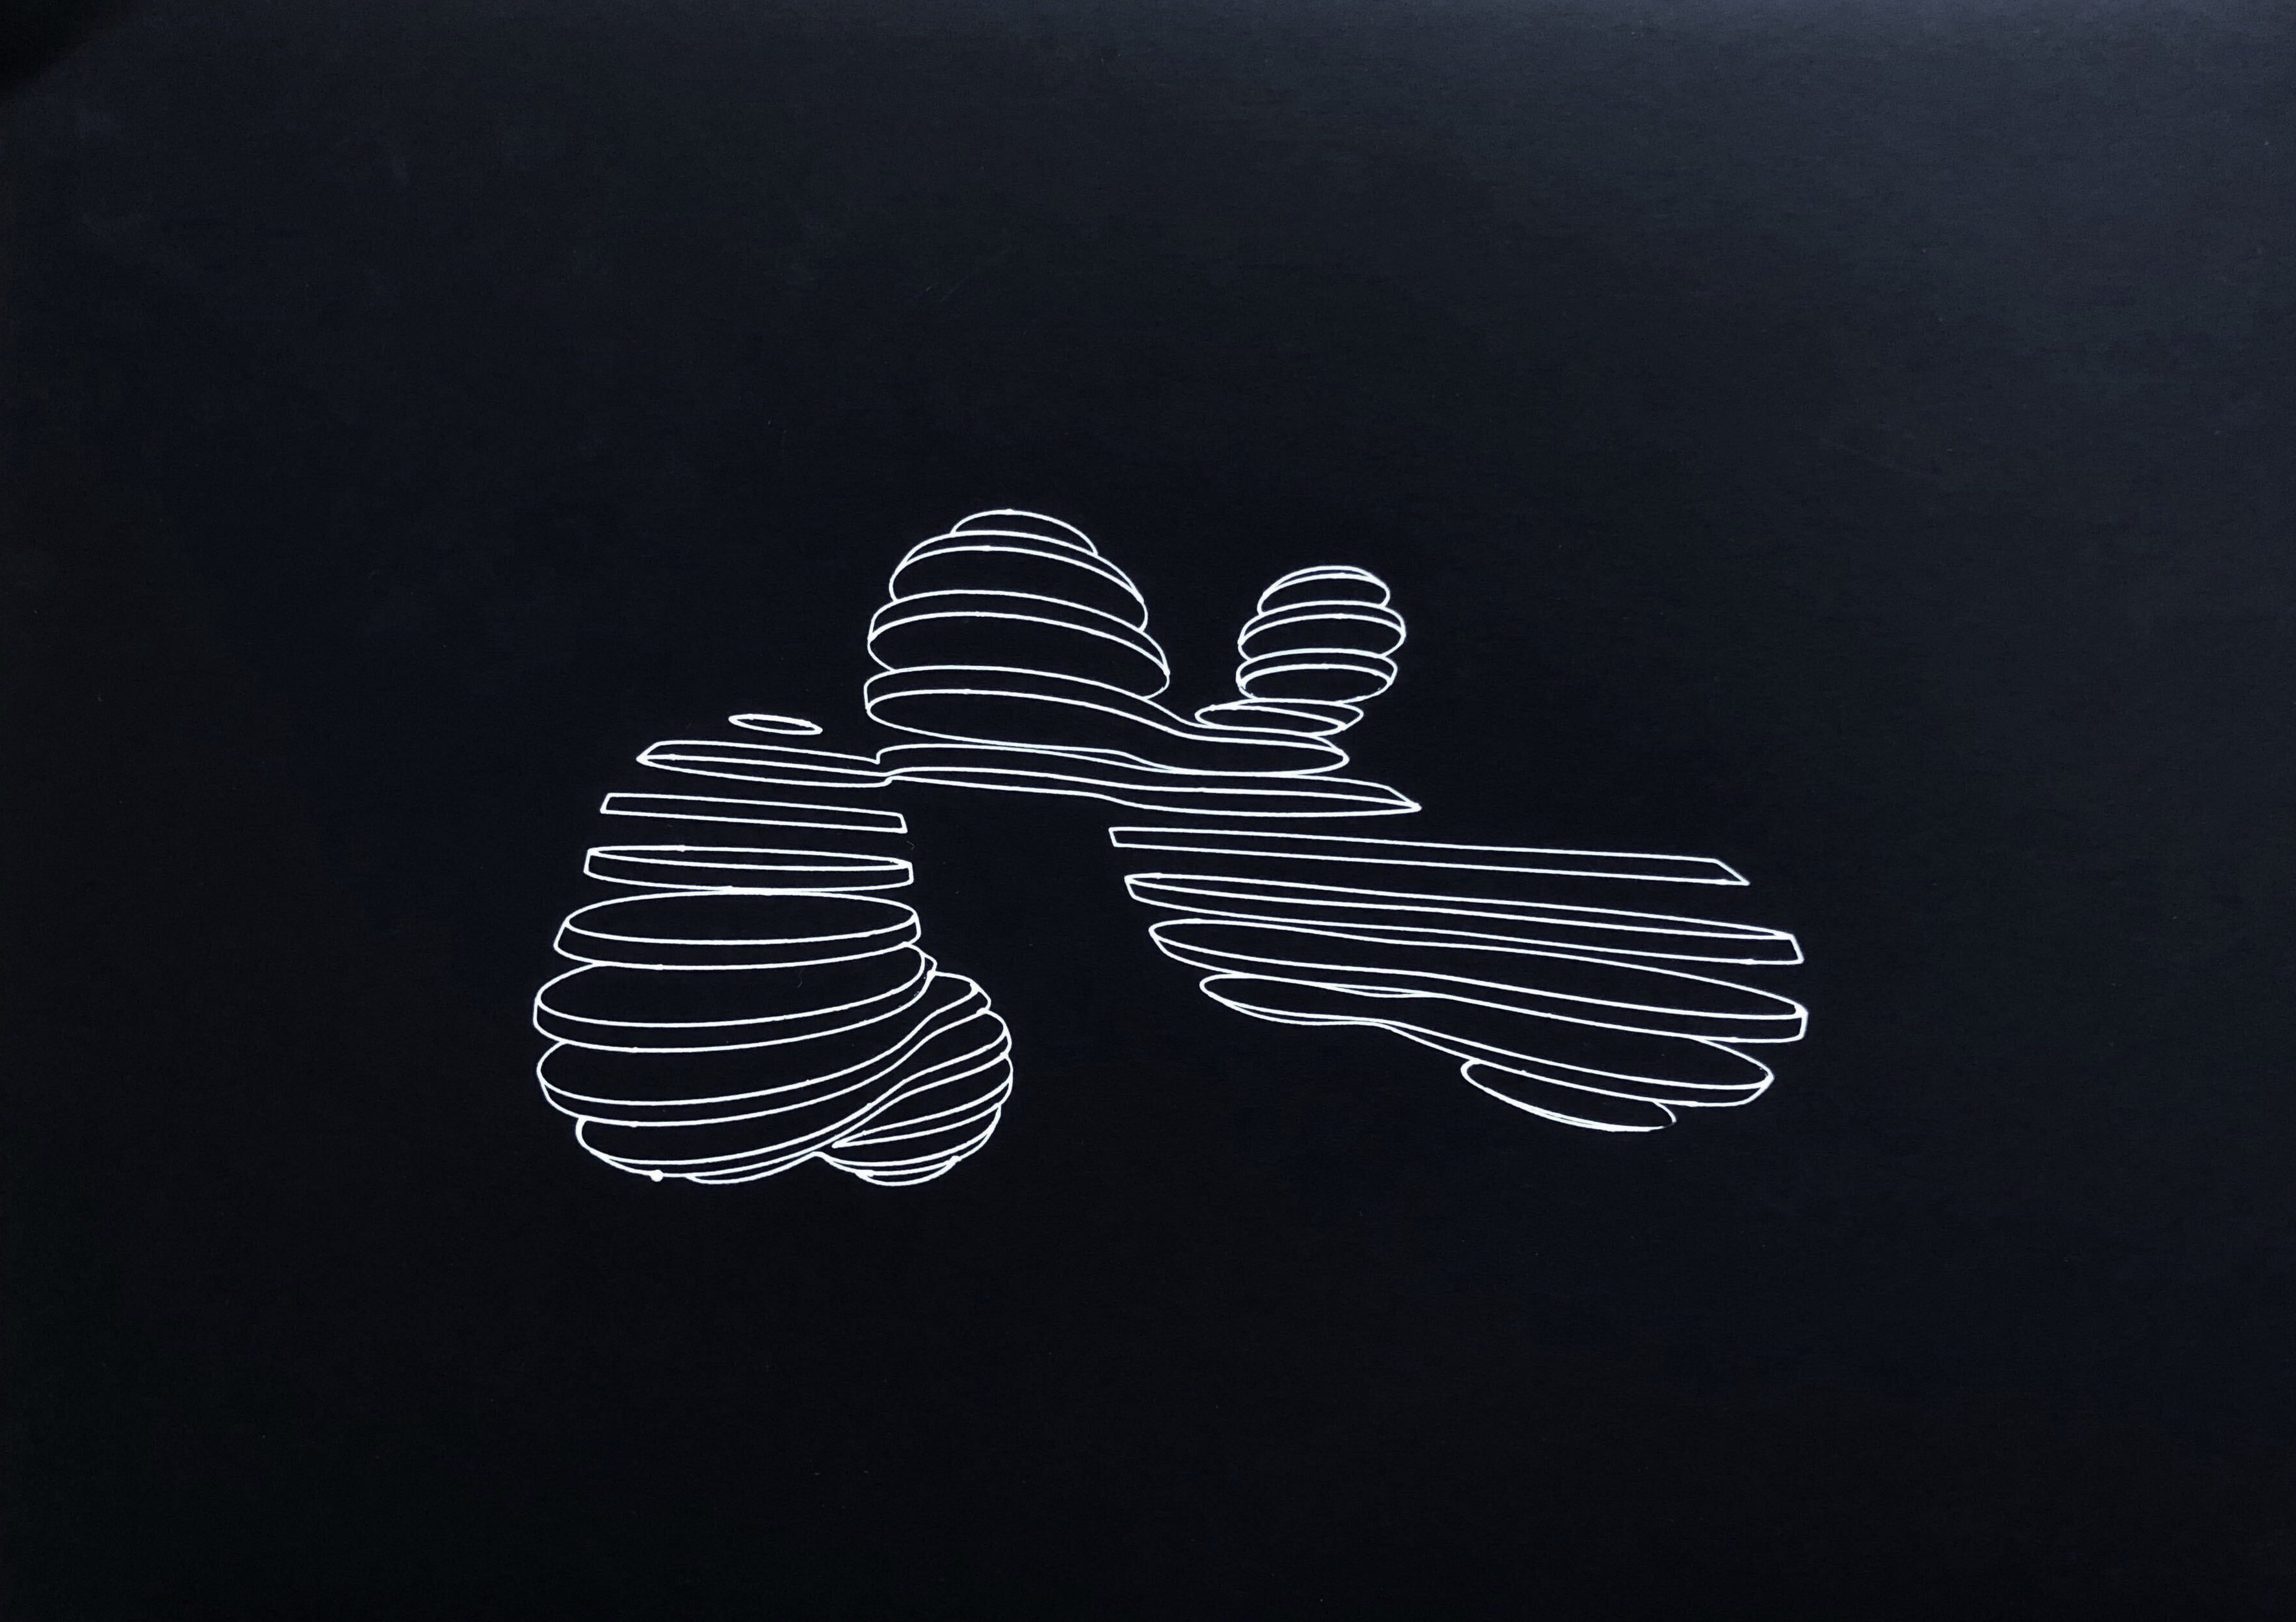 Pen plotted image generated by Metaballs, white on black